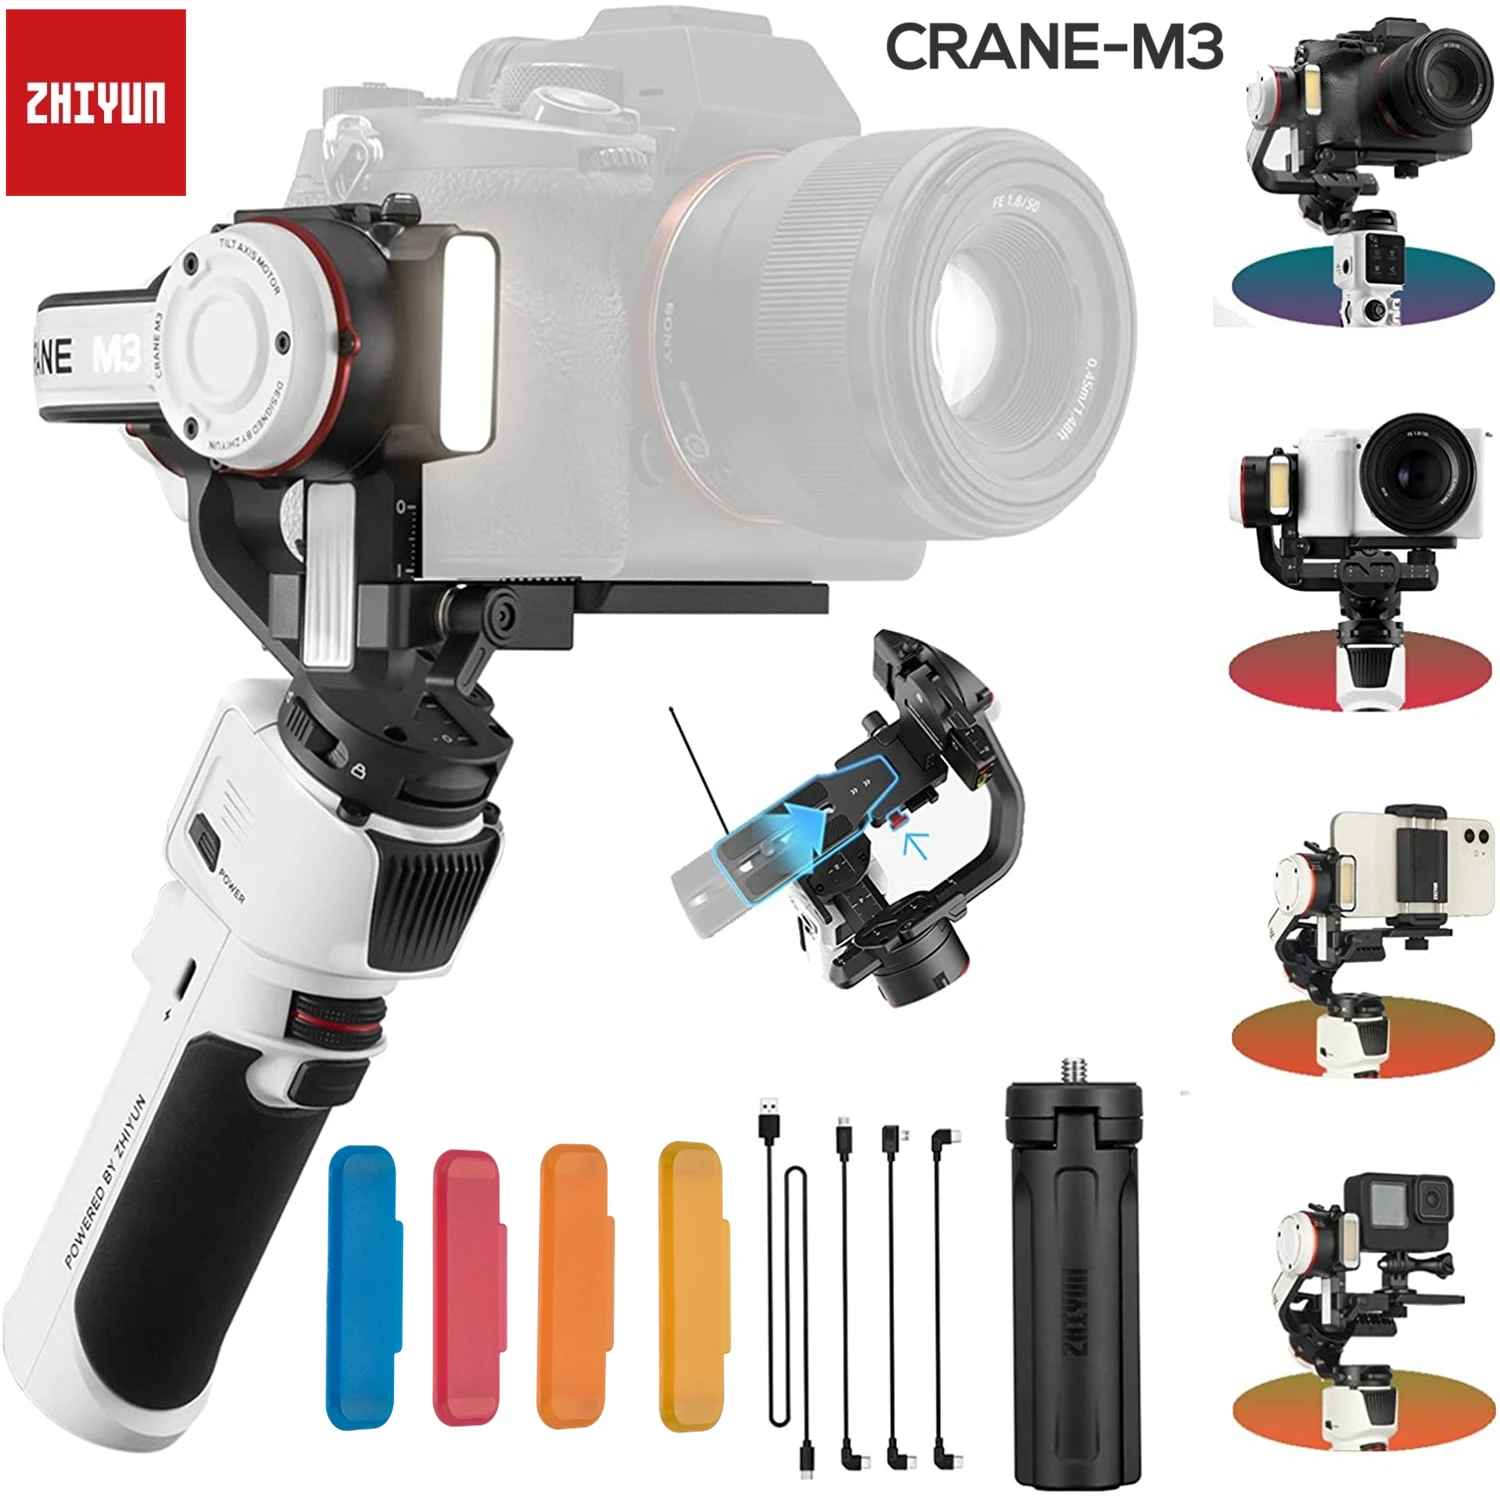 

Zhiyun Crane M3 3-Axis Handheld Gimbal Stabilizer for Mirrorless Cameras Sony A7III A6600 Gopro Hero10/9/8,iPhone 13 12 Pro Max